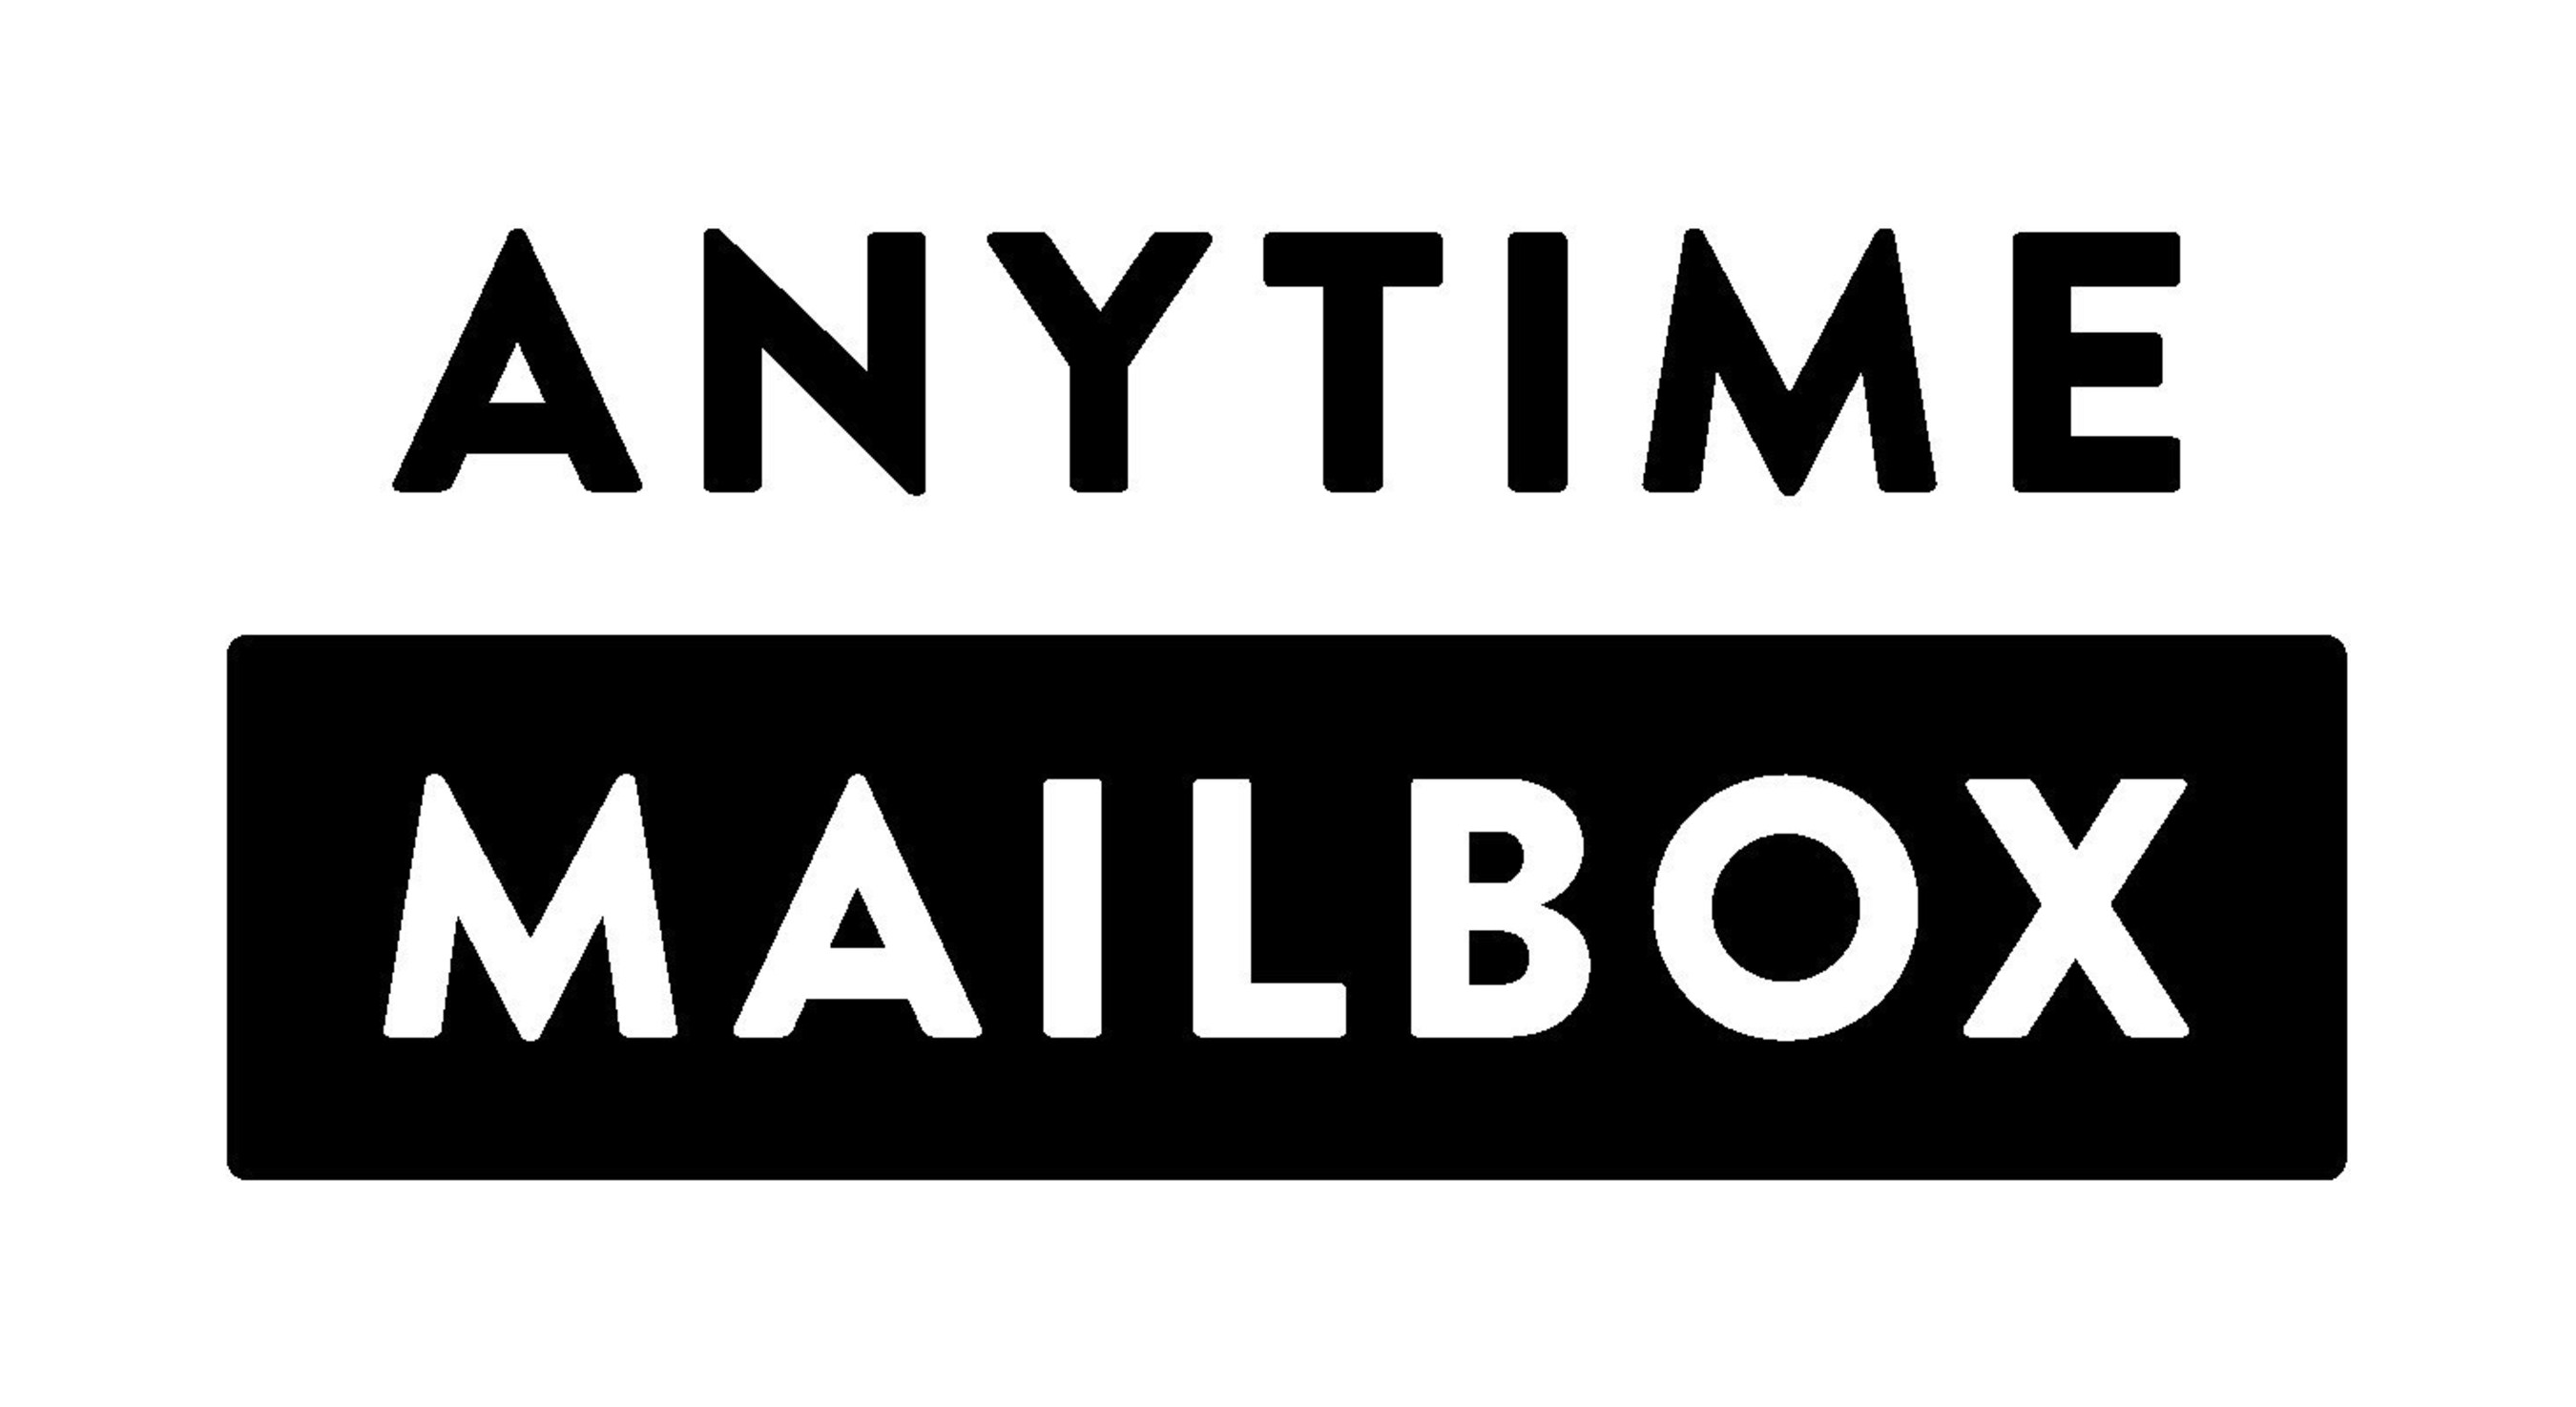 Anytime Mailbox is a mail service that securely provides customers with electronic notifications and images of their incoming mail -- directly on their computers, phones or tablet.